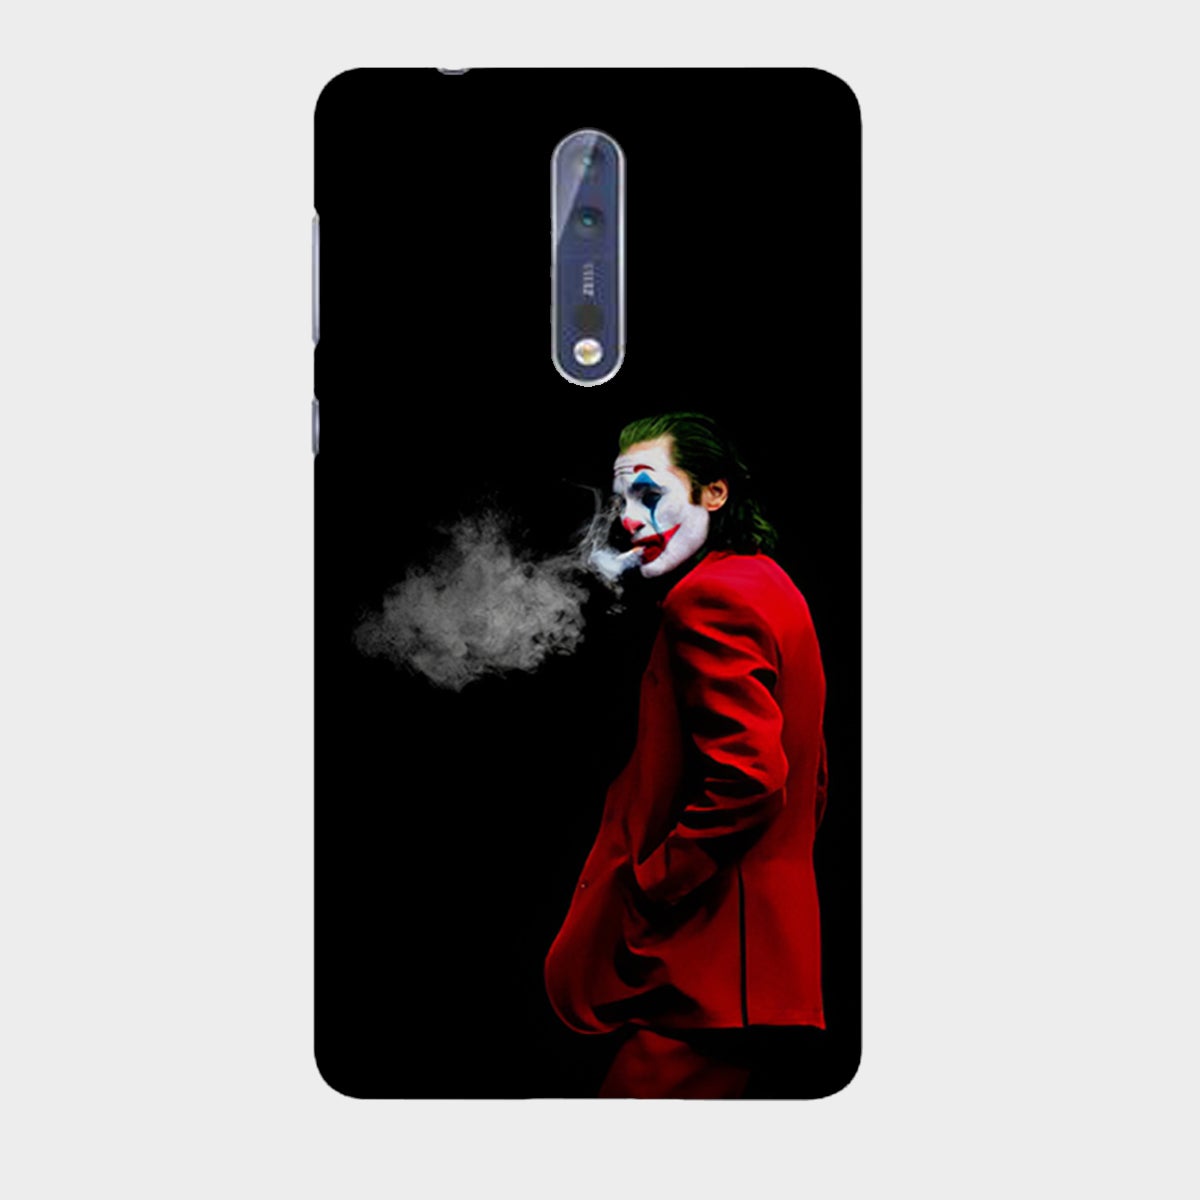 The Joker - Red Suit - Mobile Phone Cover - Hard Case